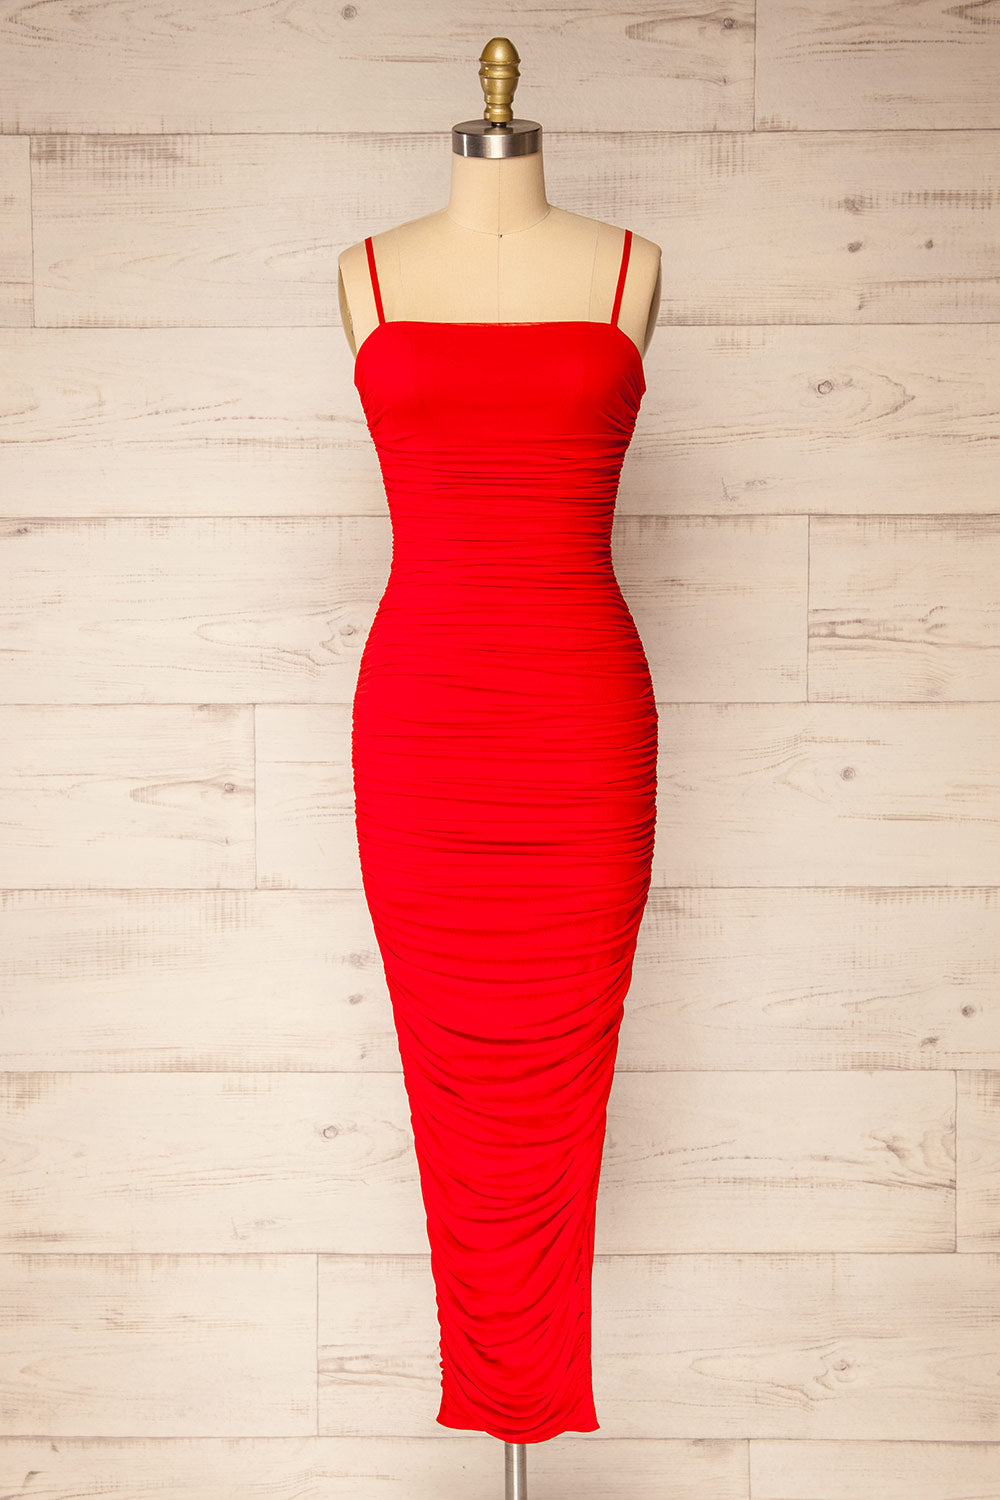 Yurtof Red Fitted Ruched Midi Dress | La petite garçonne front view